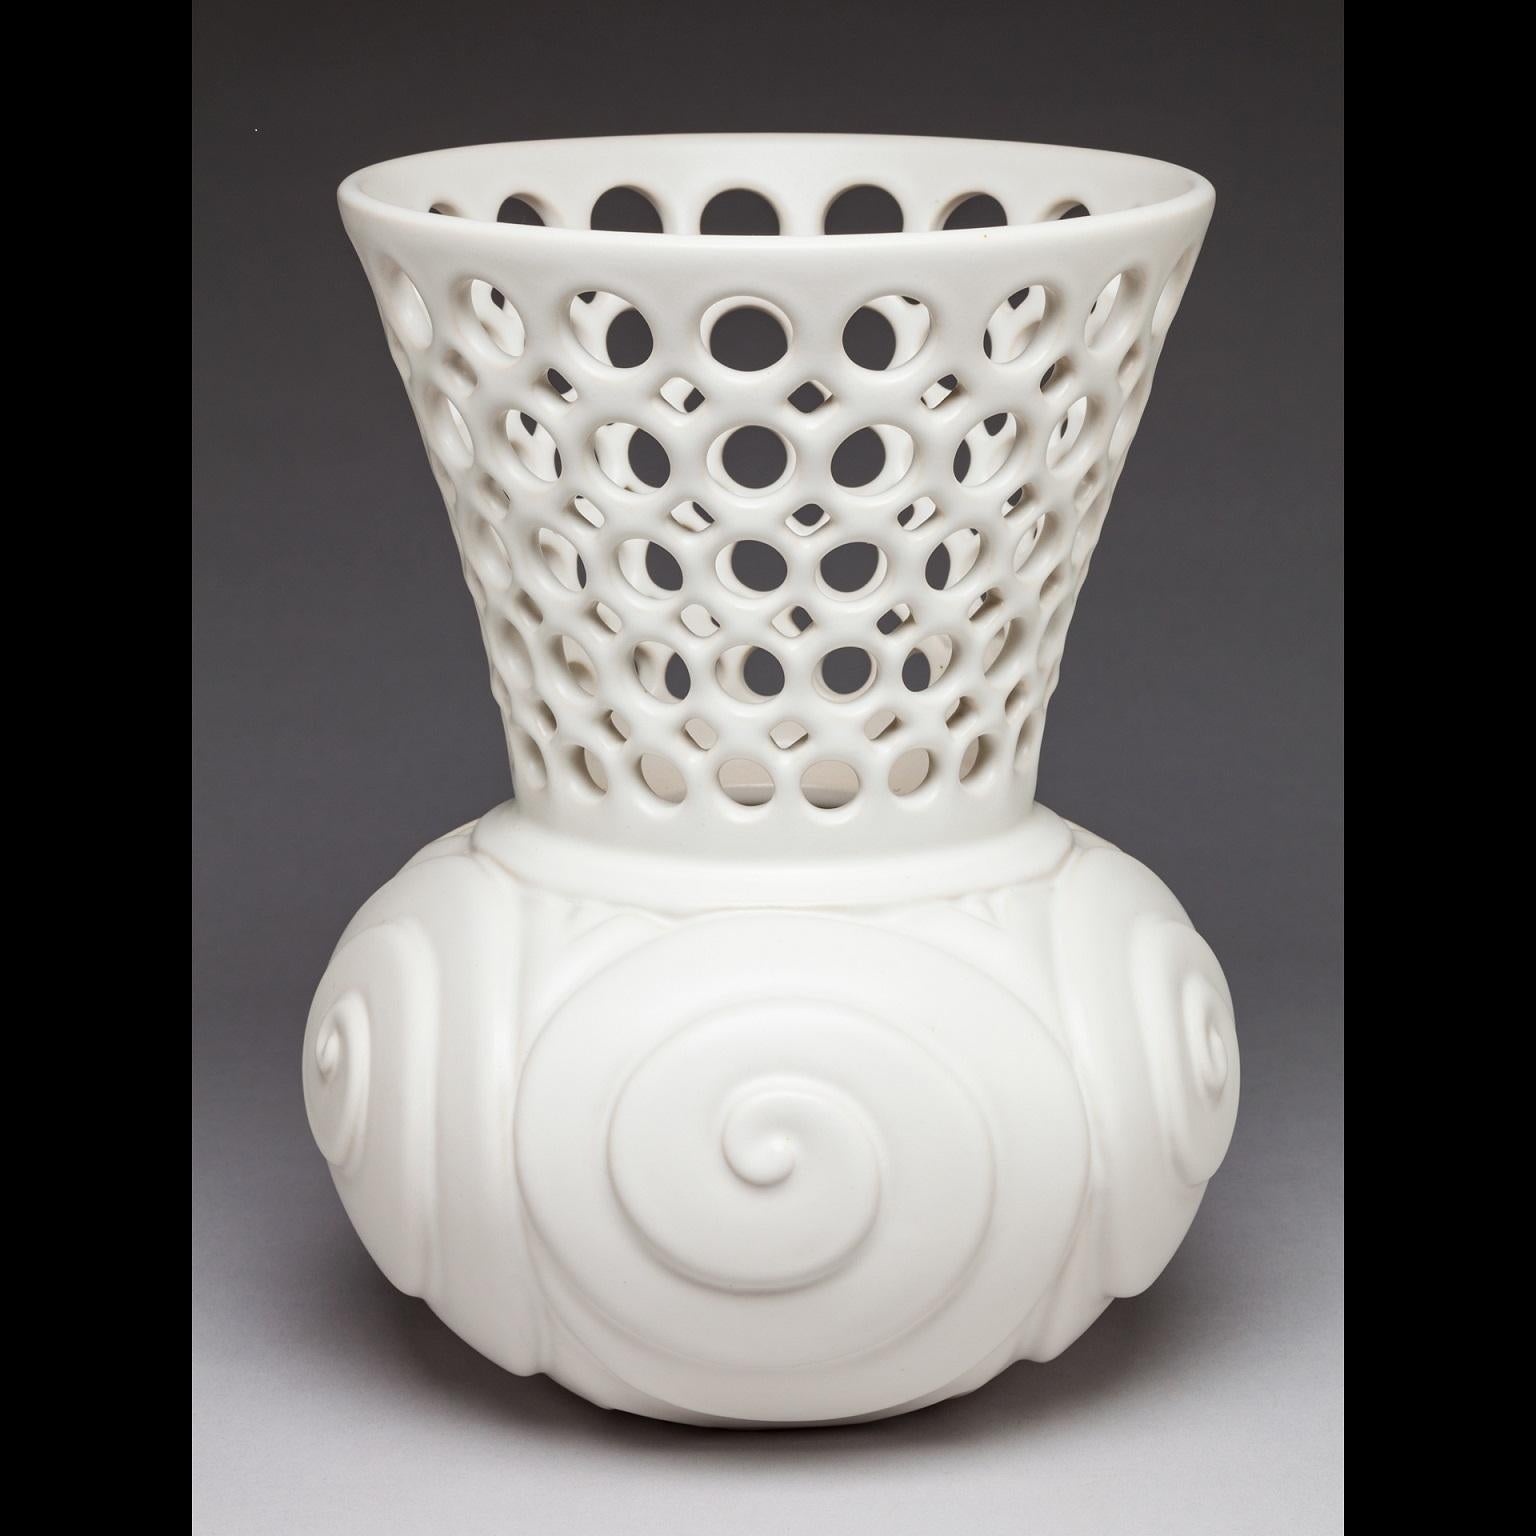 Art Nouveau White Ceramic Carved with Circular Pierced Pattern Vase or Vessel, In Stock